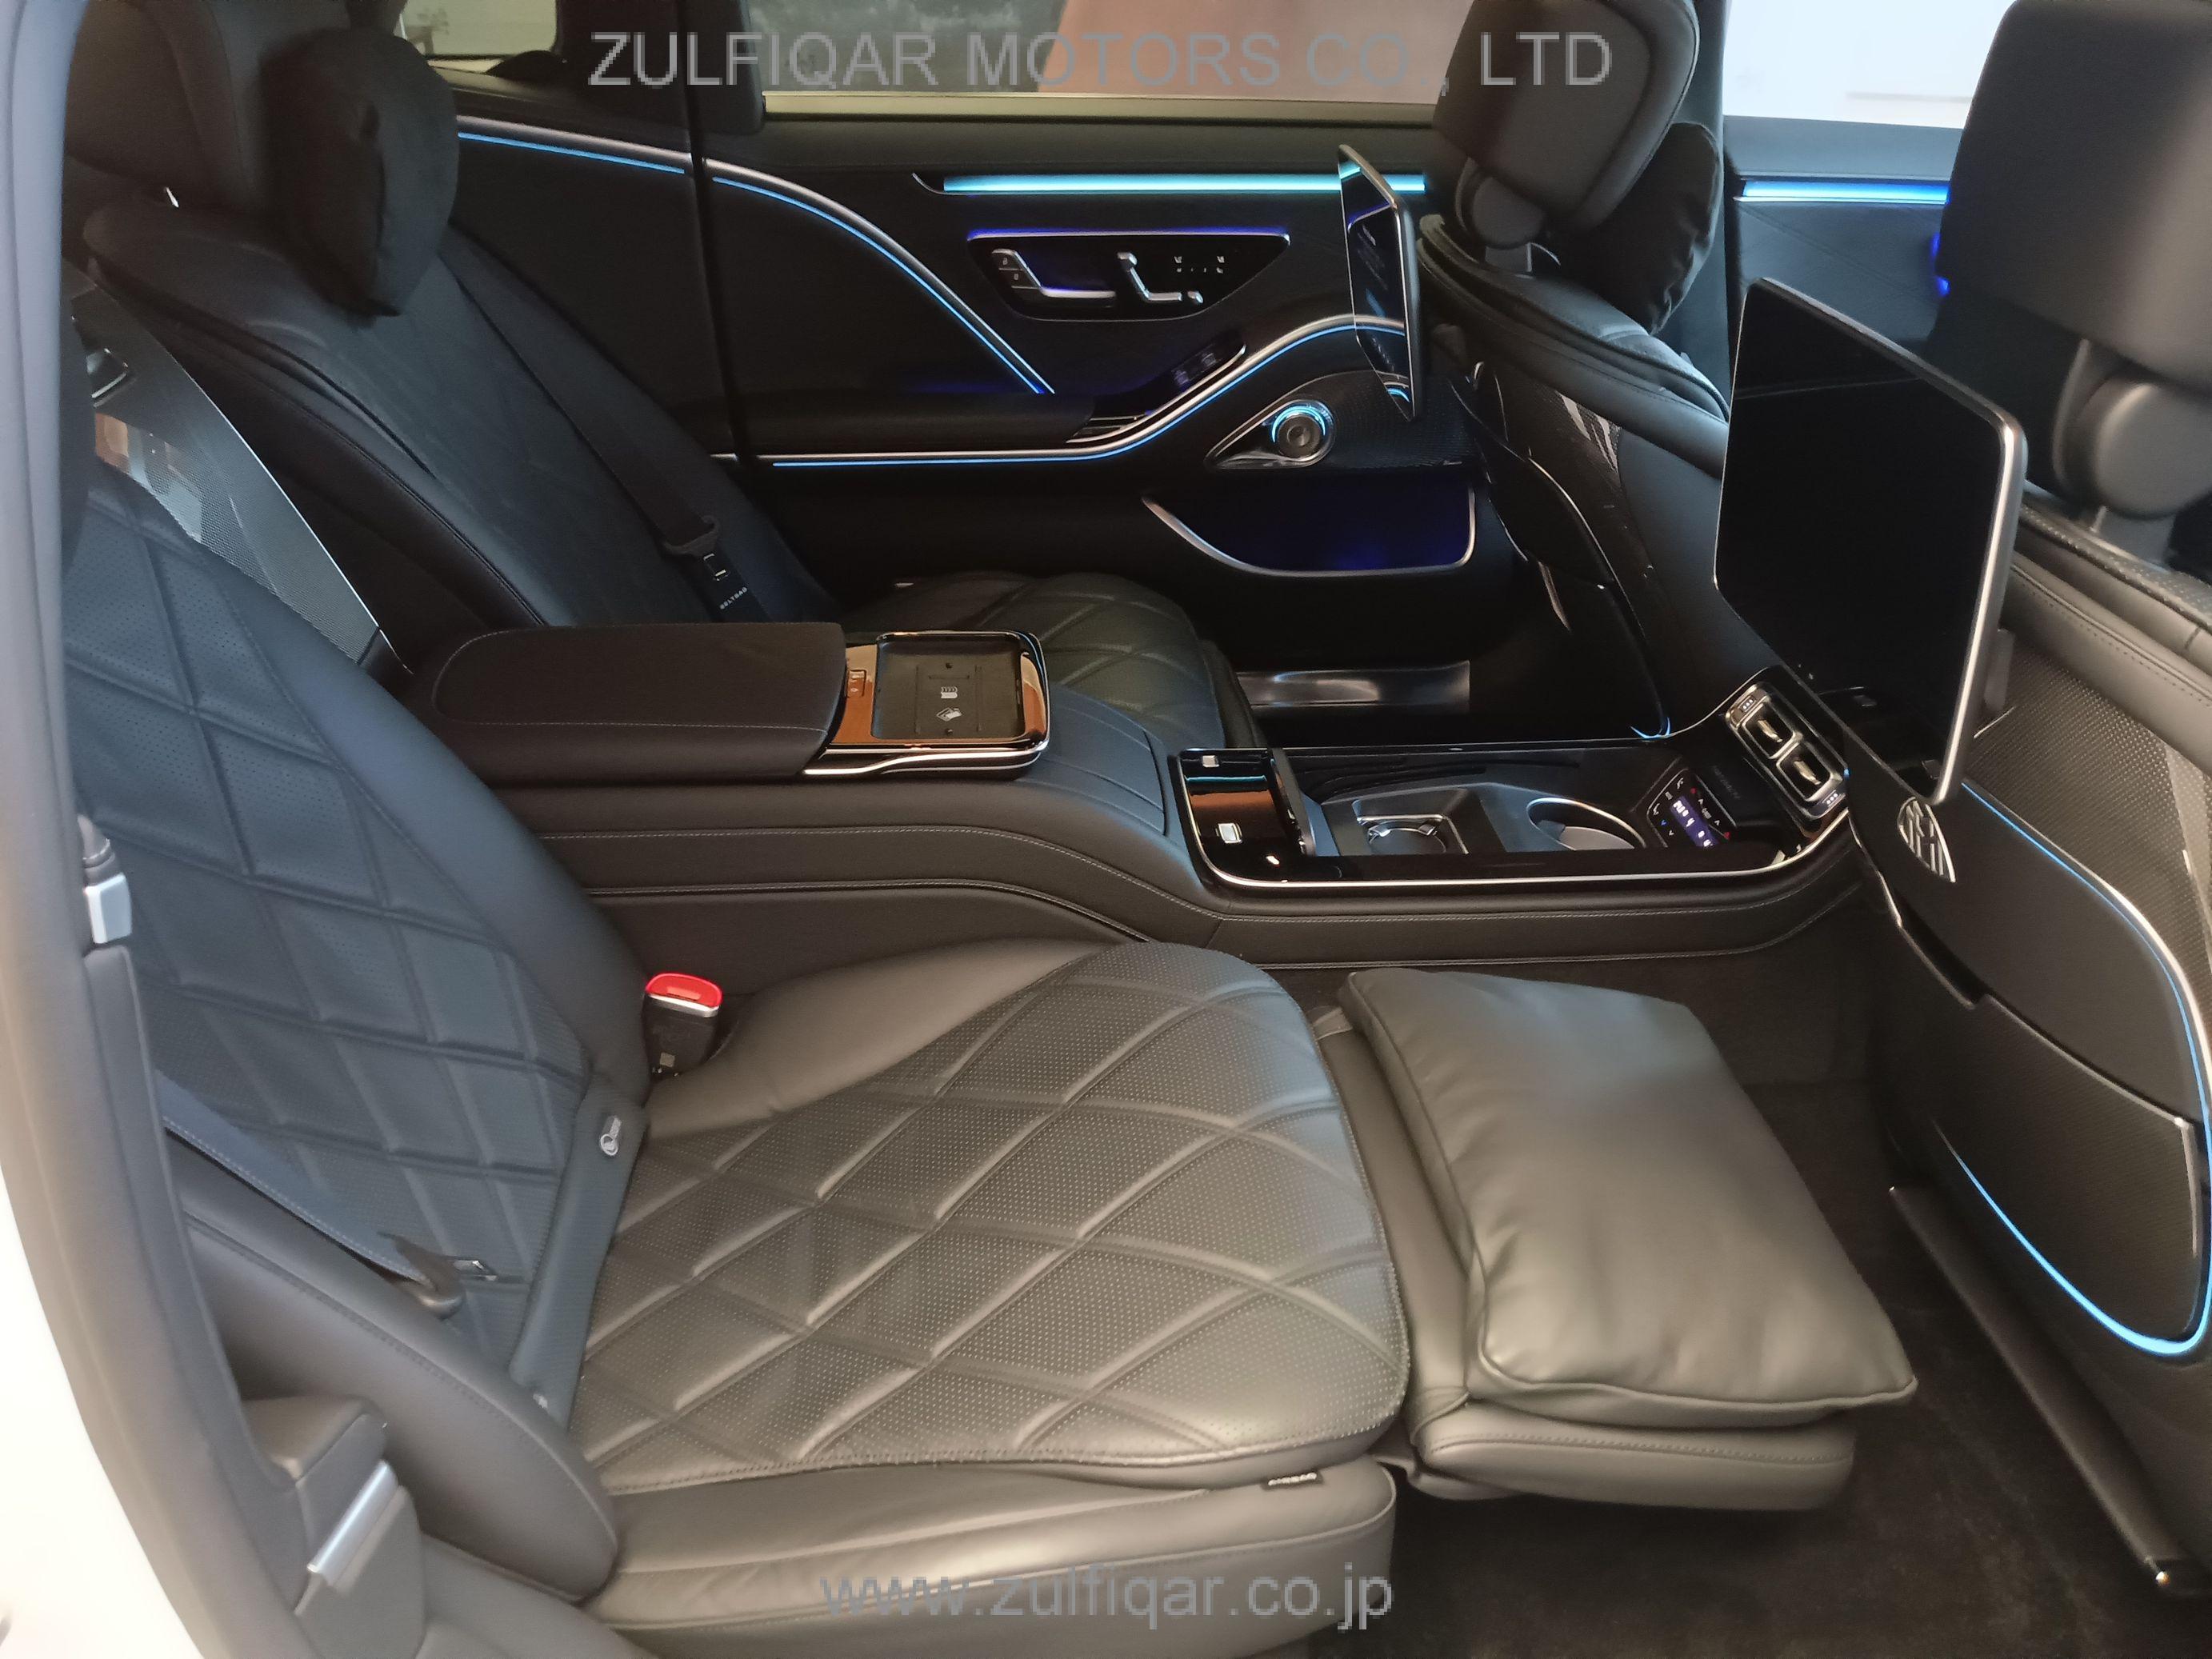 MERCEDES MAYBACH S CLASS 2022 Image 76